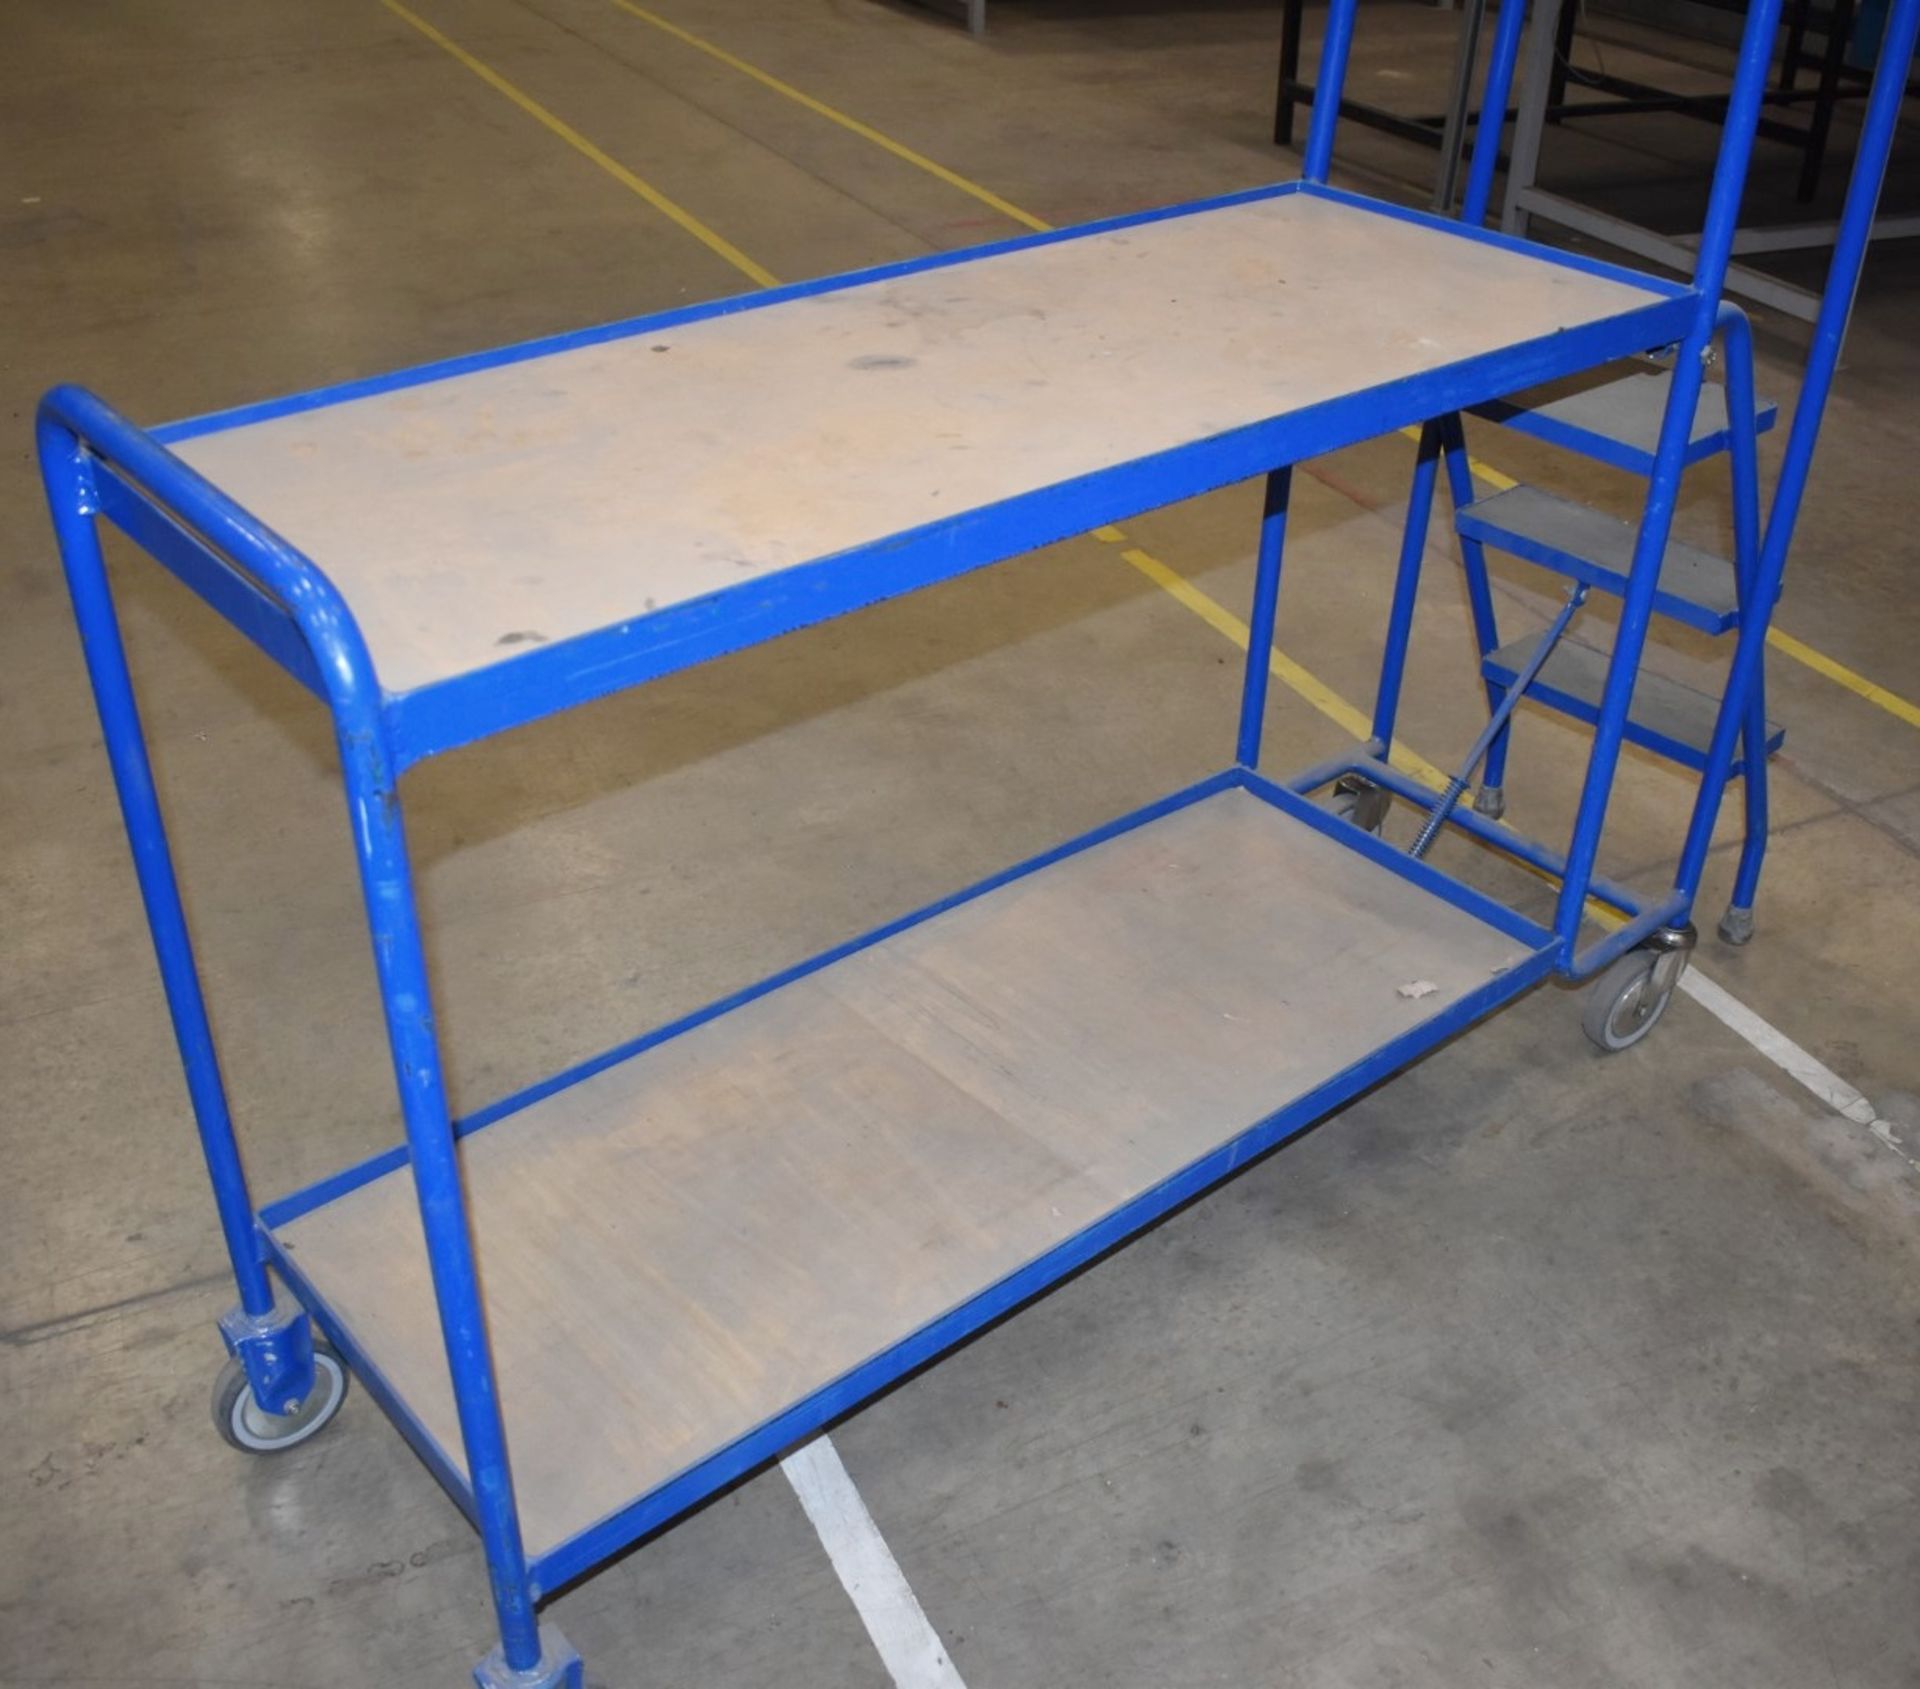 1 x Warehouse Trolley With Integrated Step Ladder - H93 x W174 x D46 cms - Ref FE191 WH - CL480 - - Image 3 of 5